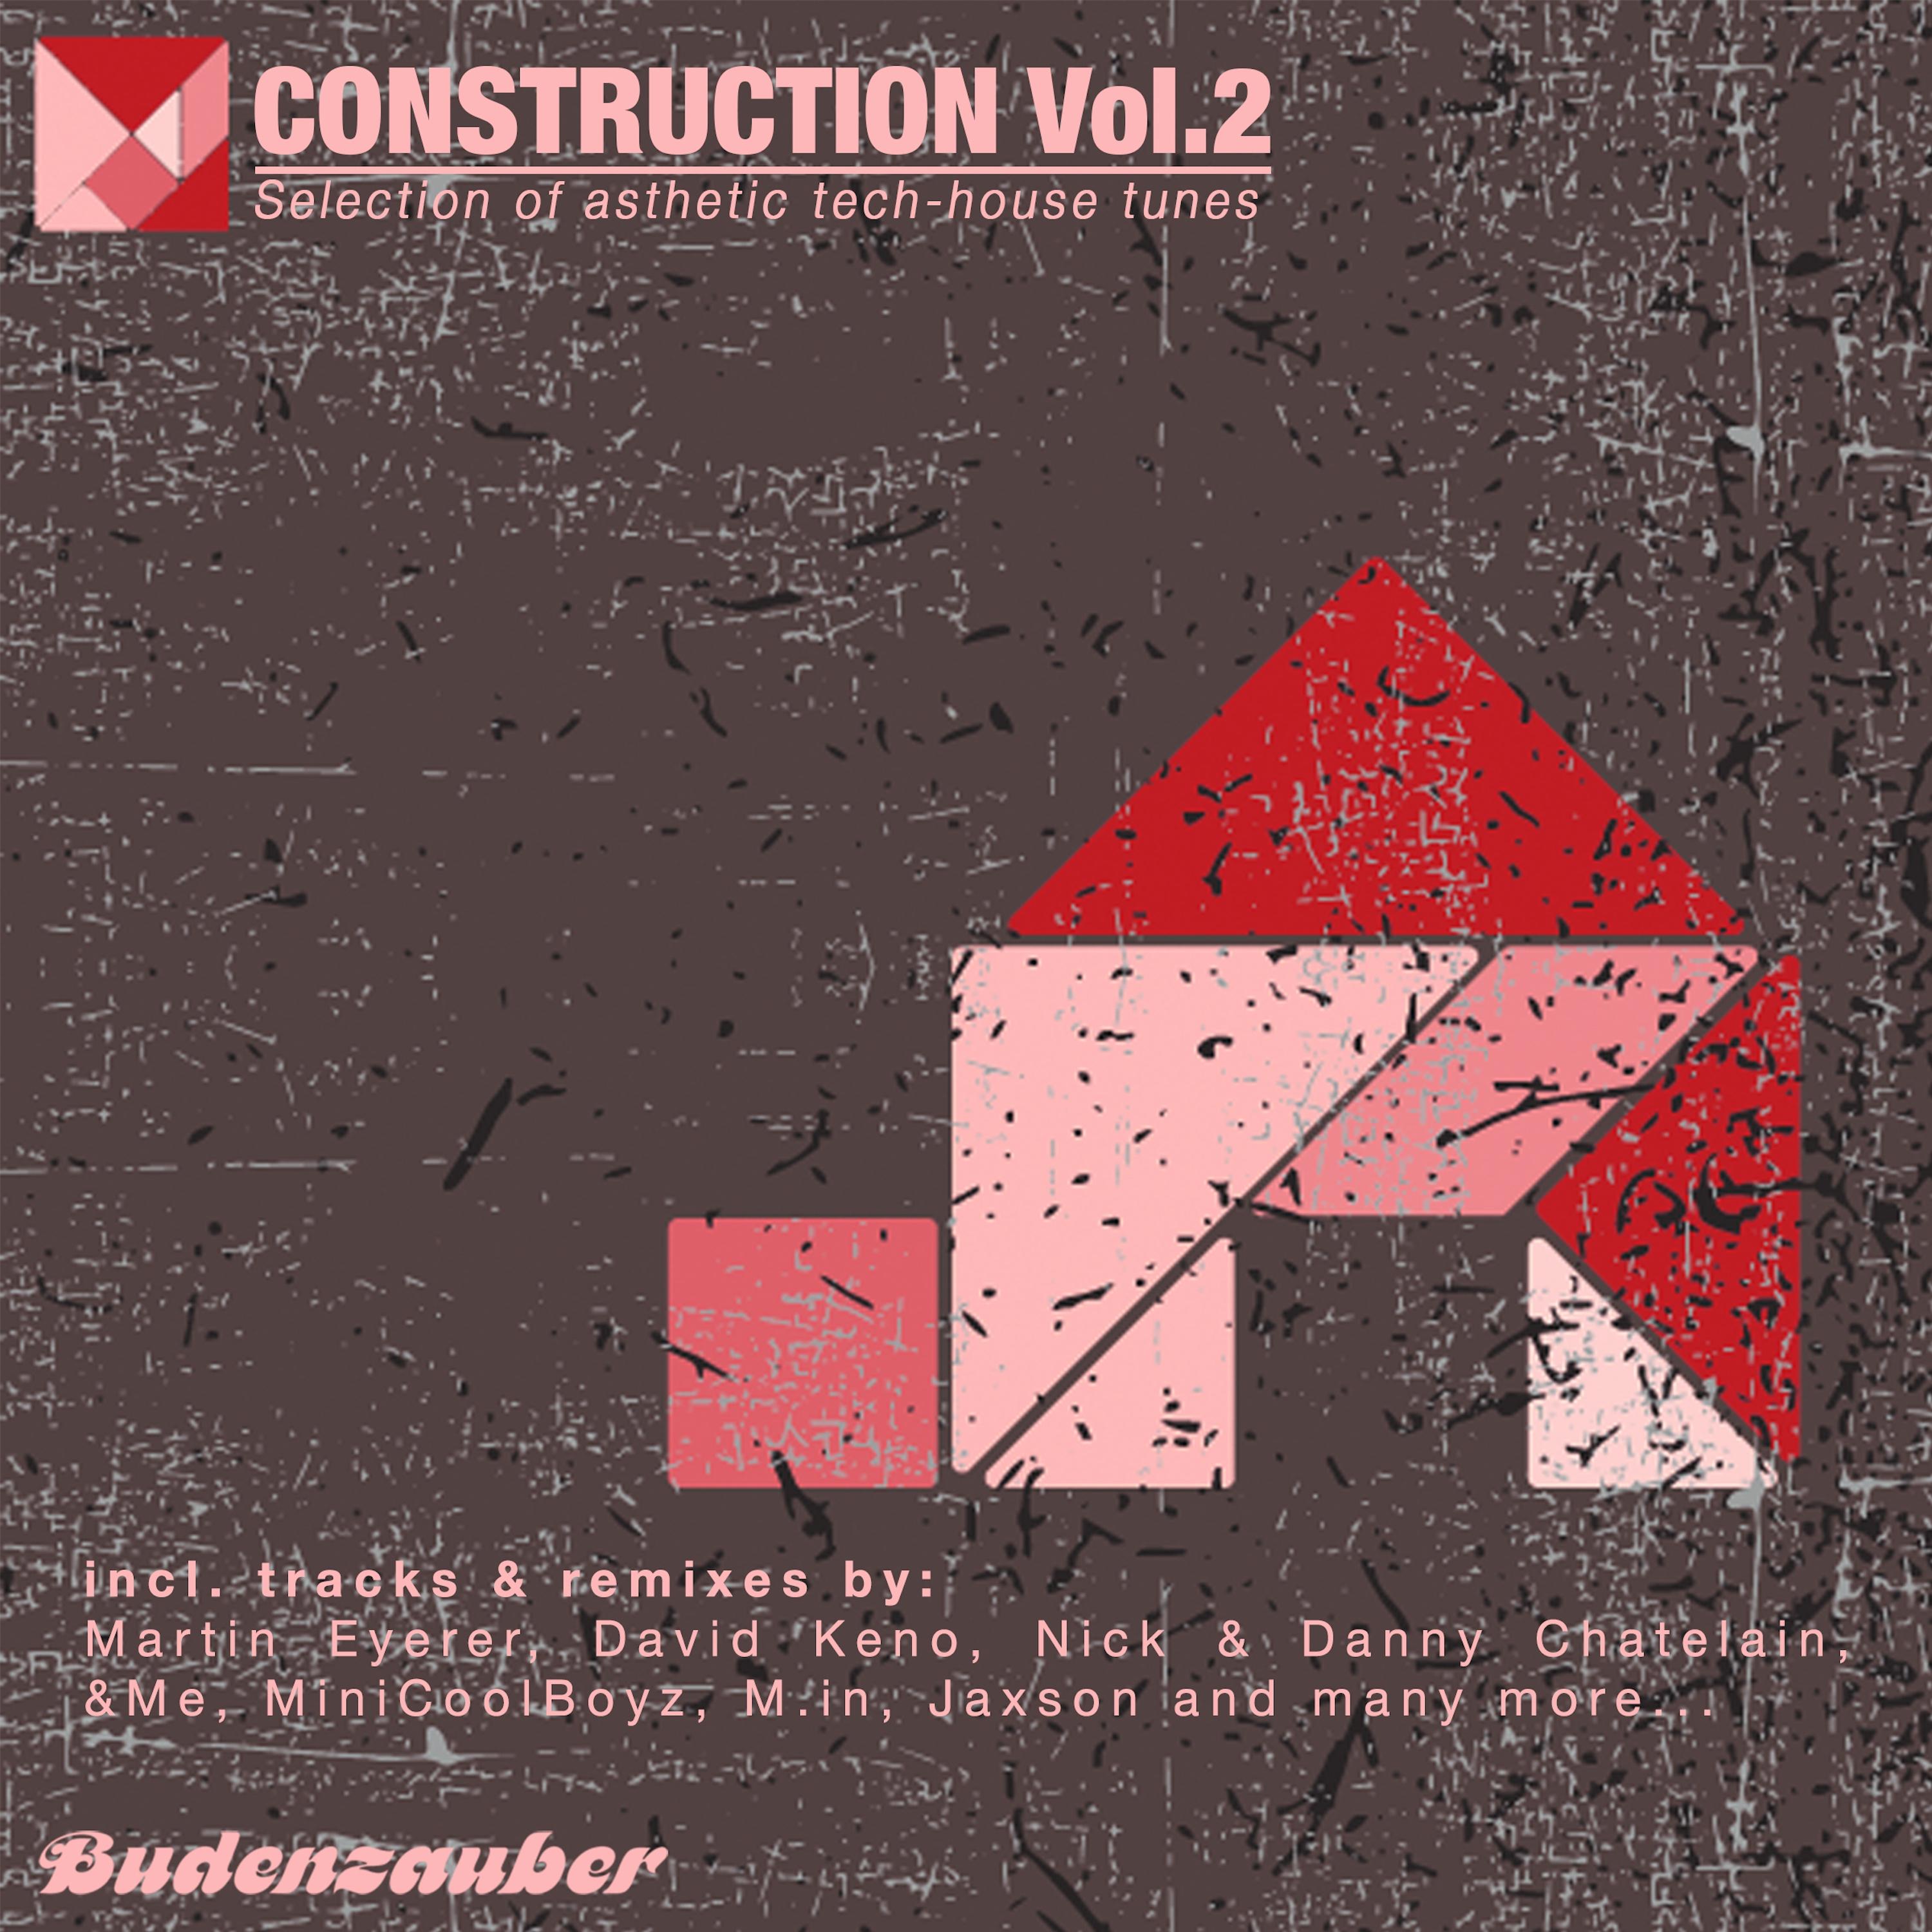 CONSTRUCTION, Vol. 2 - Selection of Asthetic Tech-House Tunes